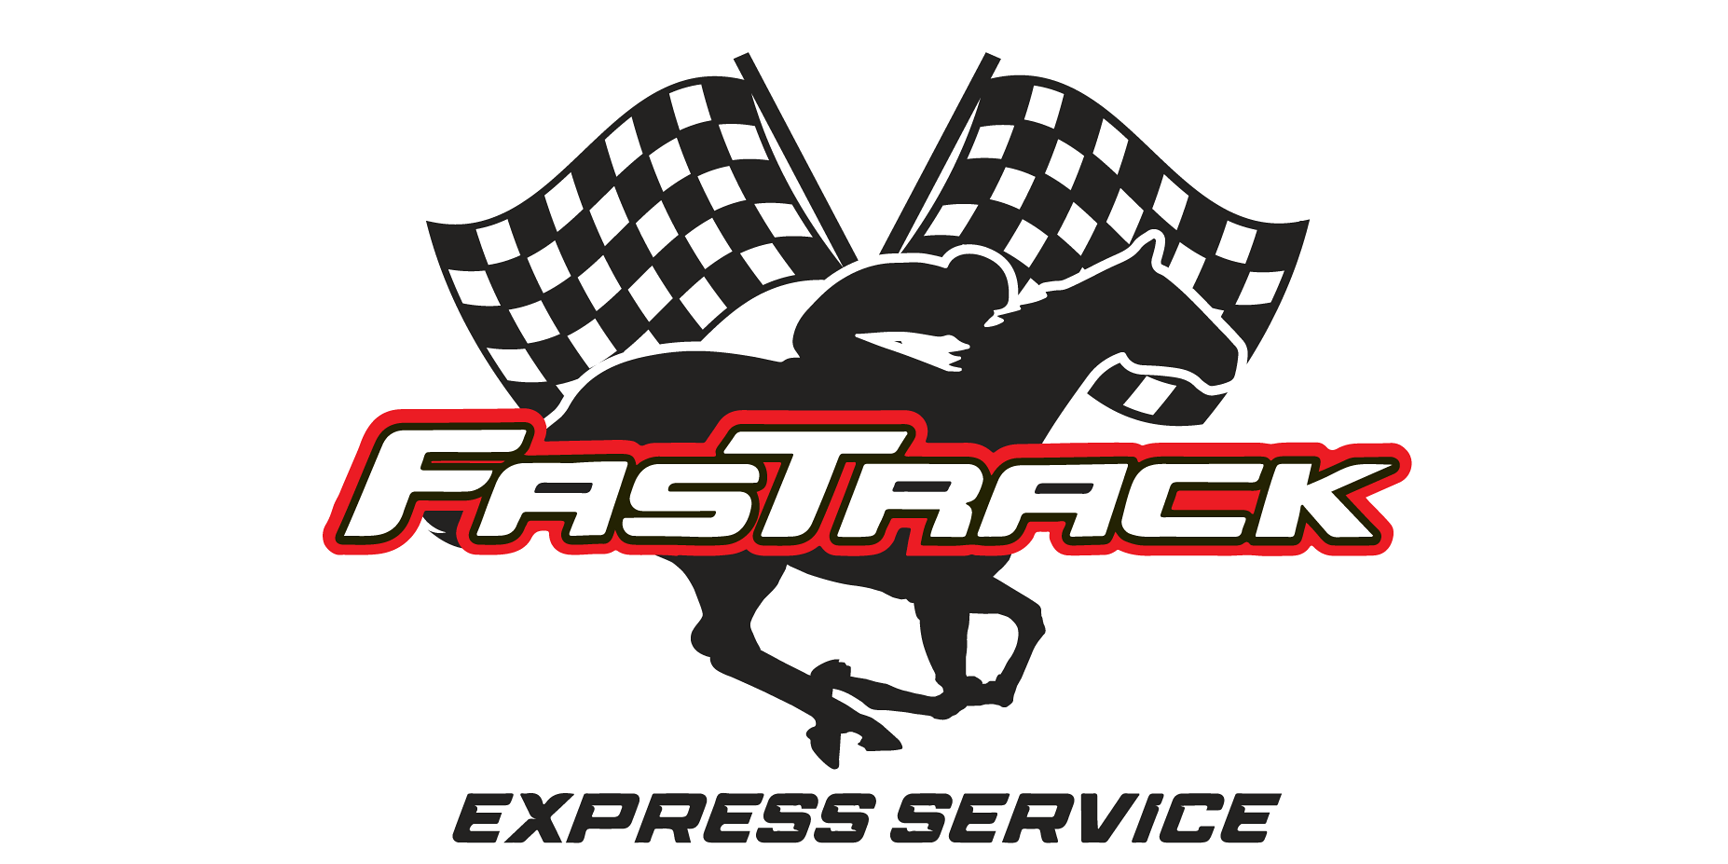 Fastrack HD wallpapers | Pxfuel